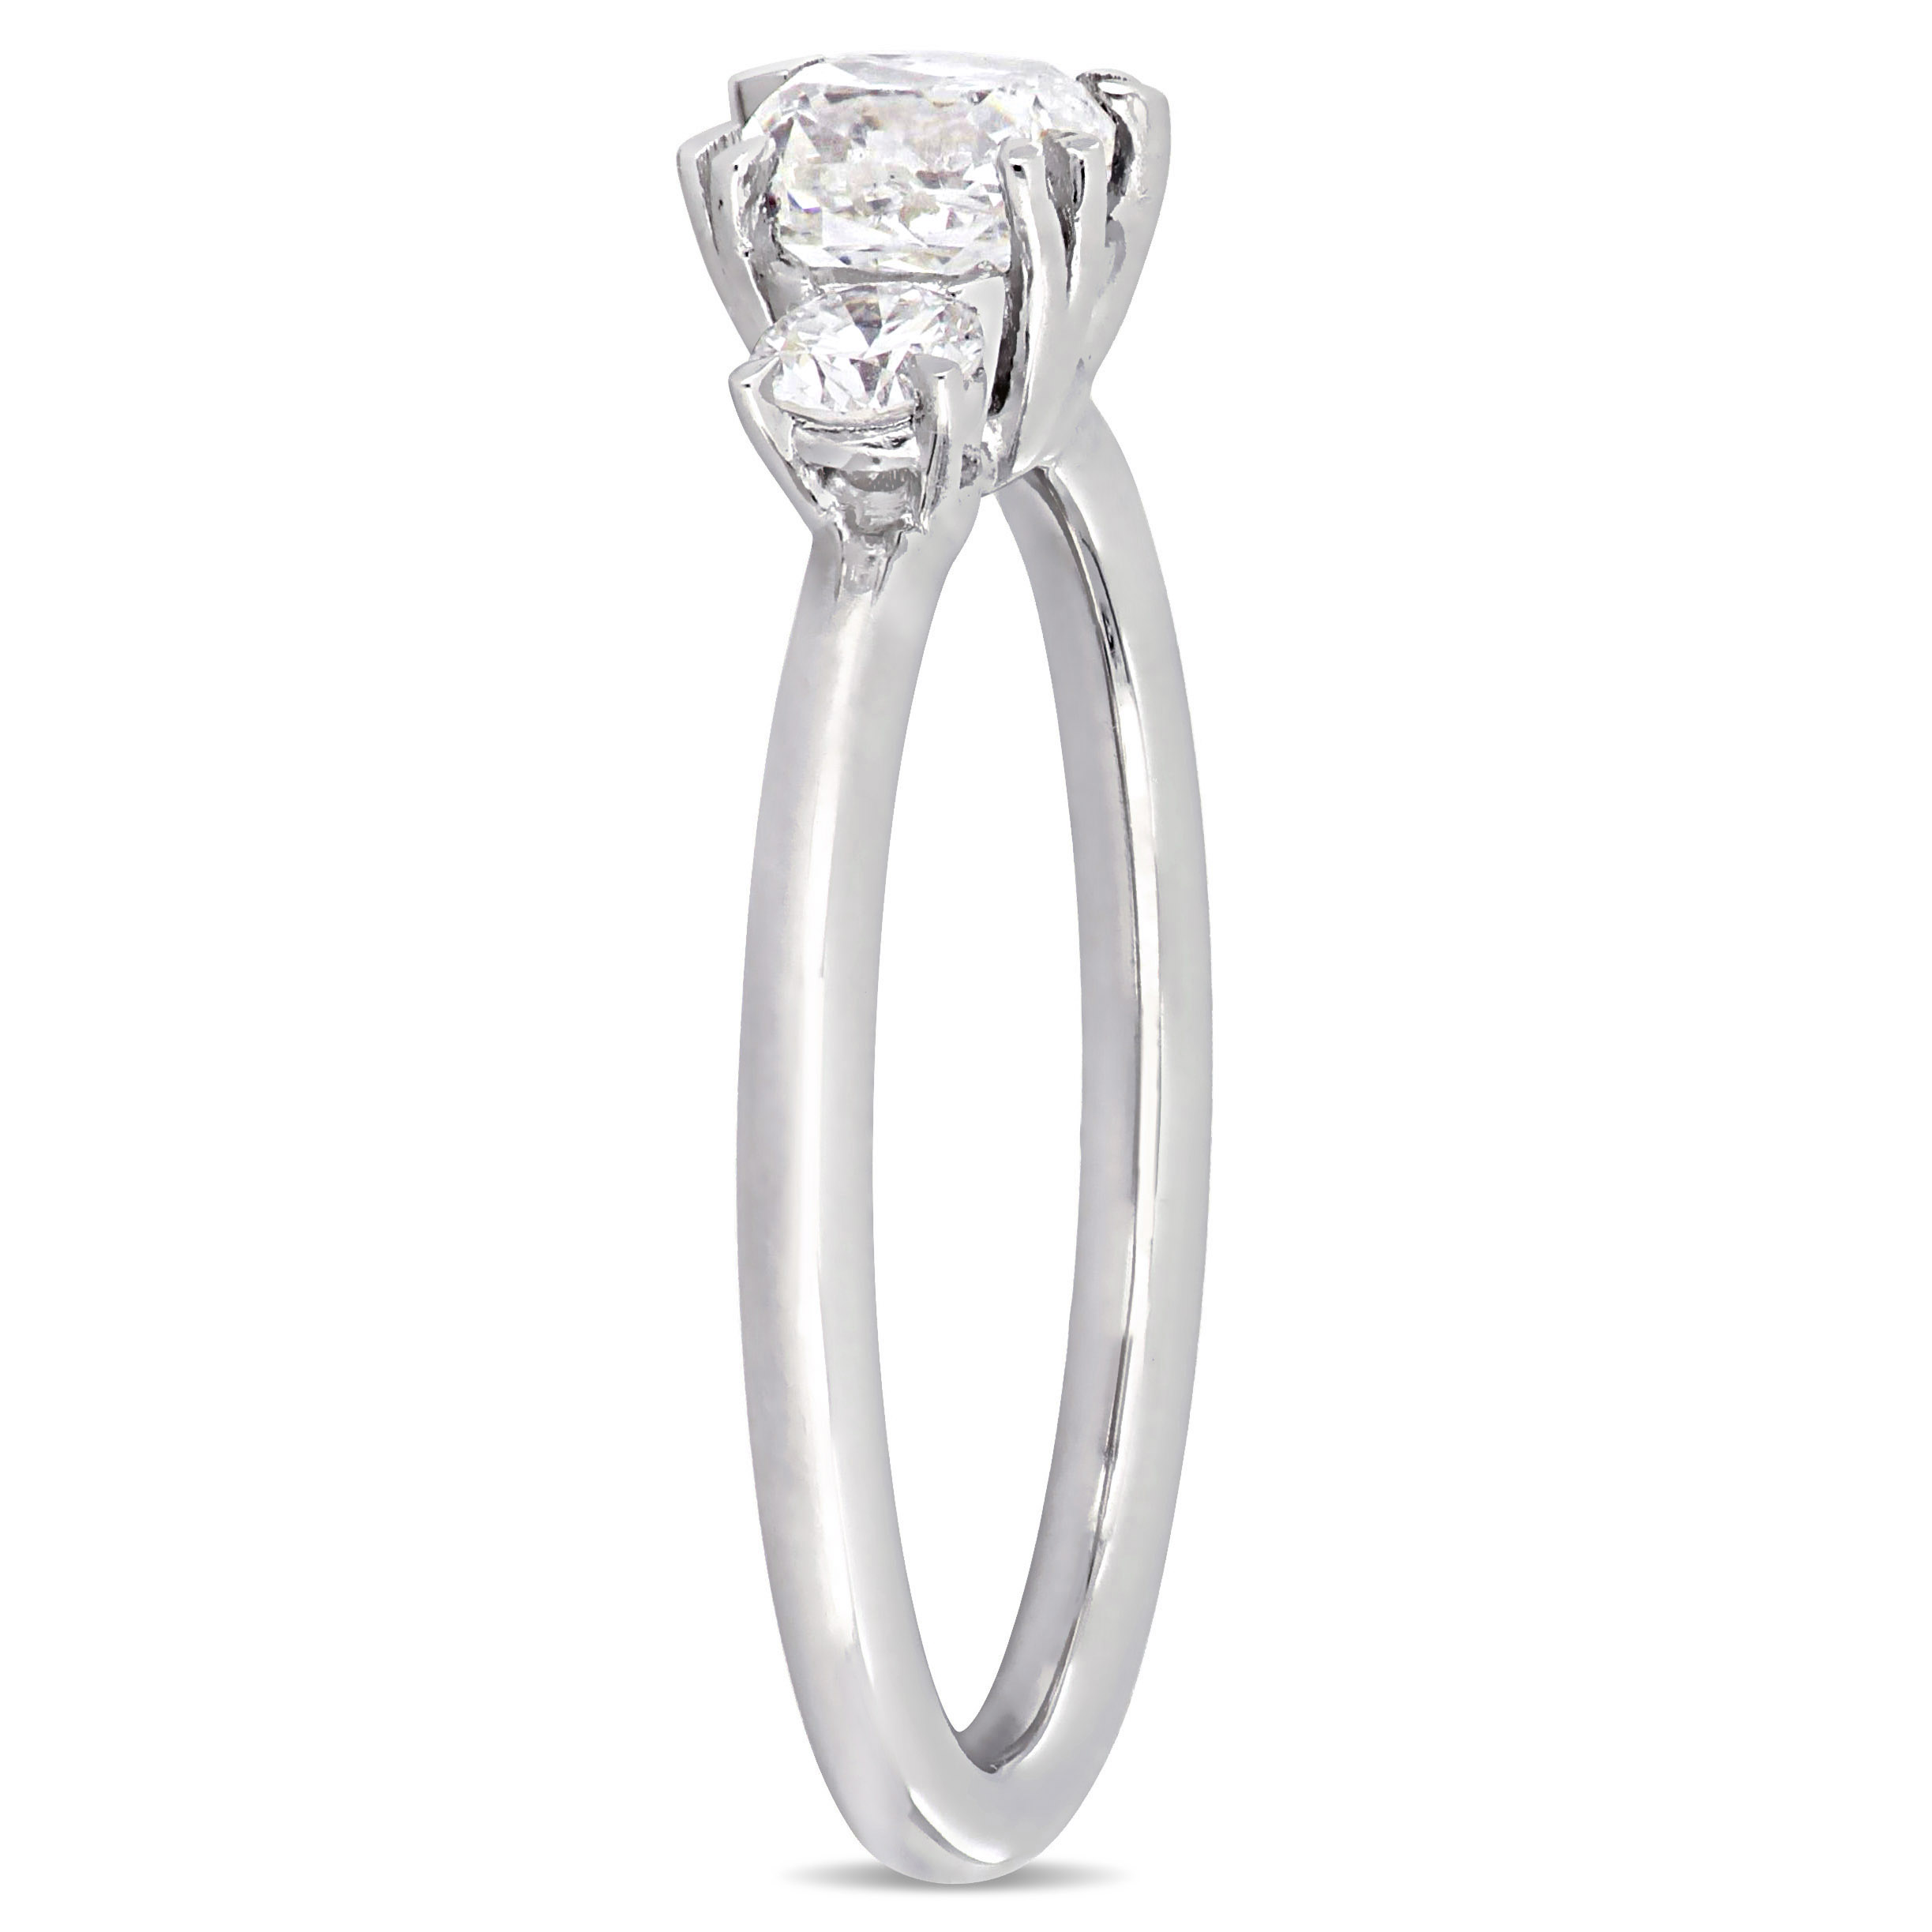 1 CT TW Cushion and Round-Cut Diamond 3-Stone Engagement Ring in 14k White Gold